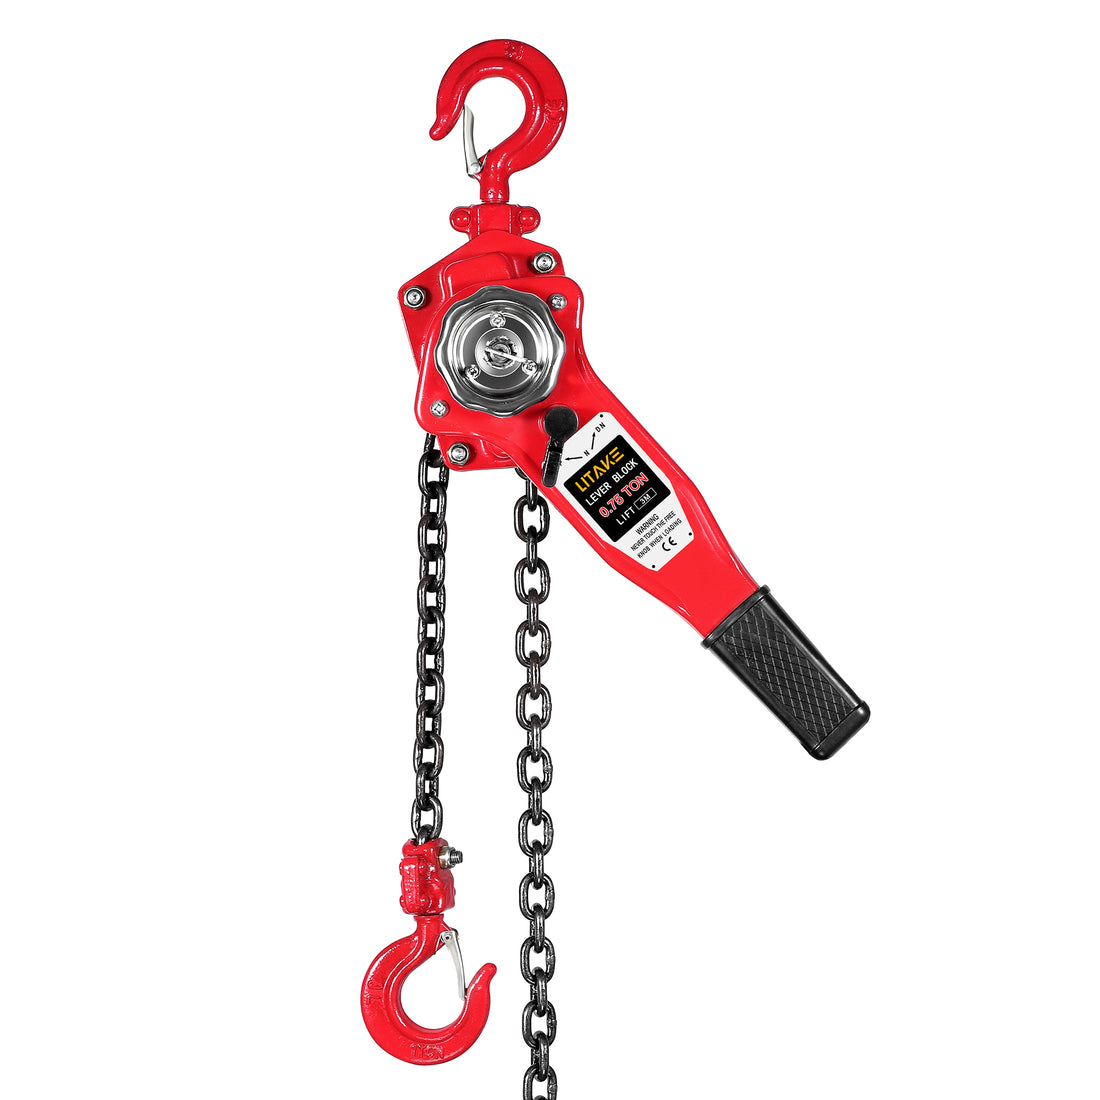 Lever Chain Hoist, Manual Lever Hoist Come Along 0.75 TON /1650 LBS, 10 Feet Lift Steel Chain with Heavy Duty Hooks Industrial Grade Steel for Lifting Pulling Building Garages Warehouse